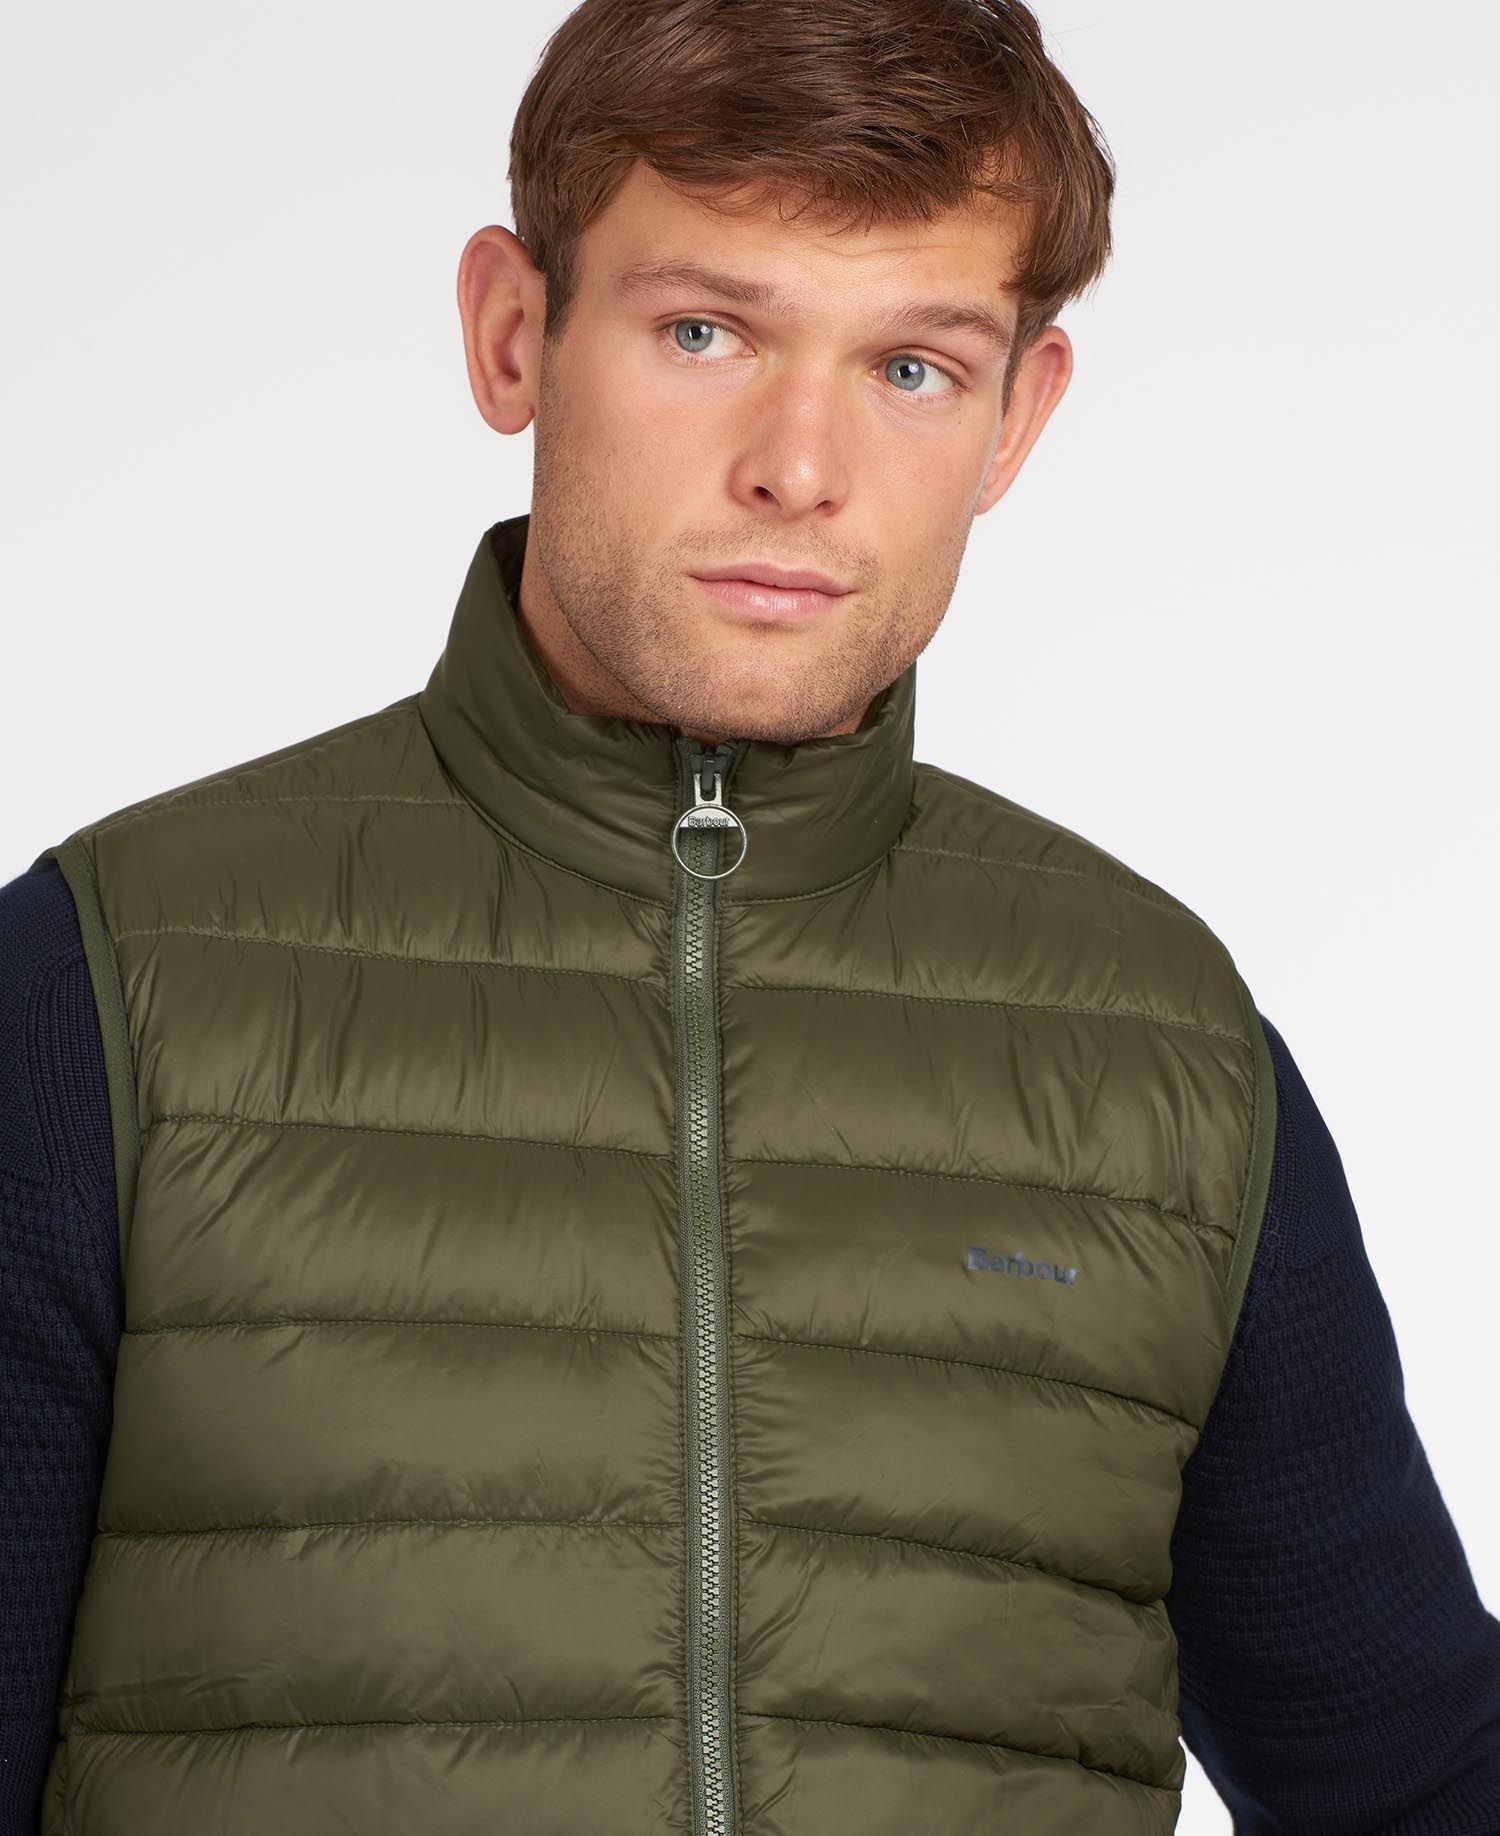 Barbour Bretby Gilet in Olive | Barbour